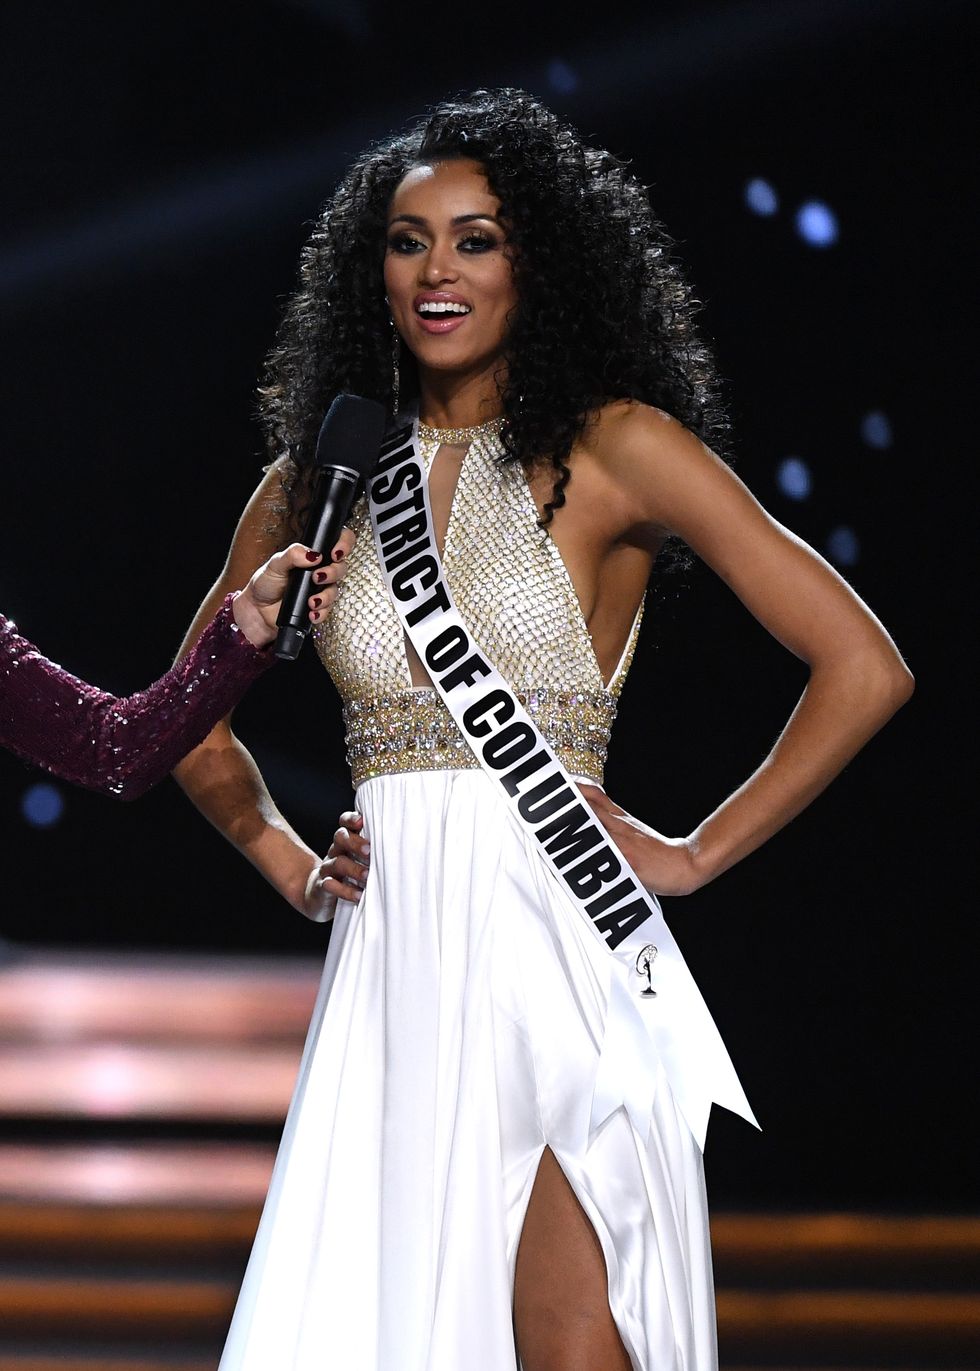 LAS VEGAS, NV - MAY 14:  Miss District of Columbia USA 2017 Kara McCullough answers a question during the interview portion of  the 2017 Miss USA pageant at the Mandalay Bay Events Center on May 14, 2017 in Las Vegas, Nevada. She went on to be named the new Miss USA.  (Photo by Ethan Miller/Getty Images)